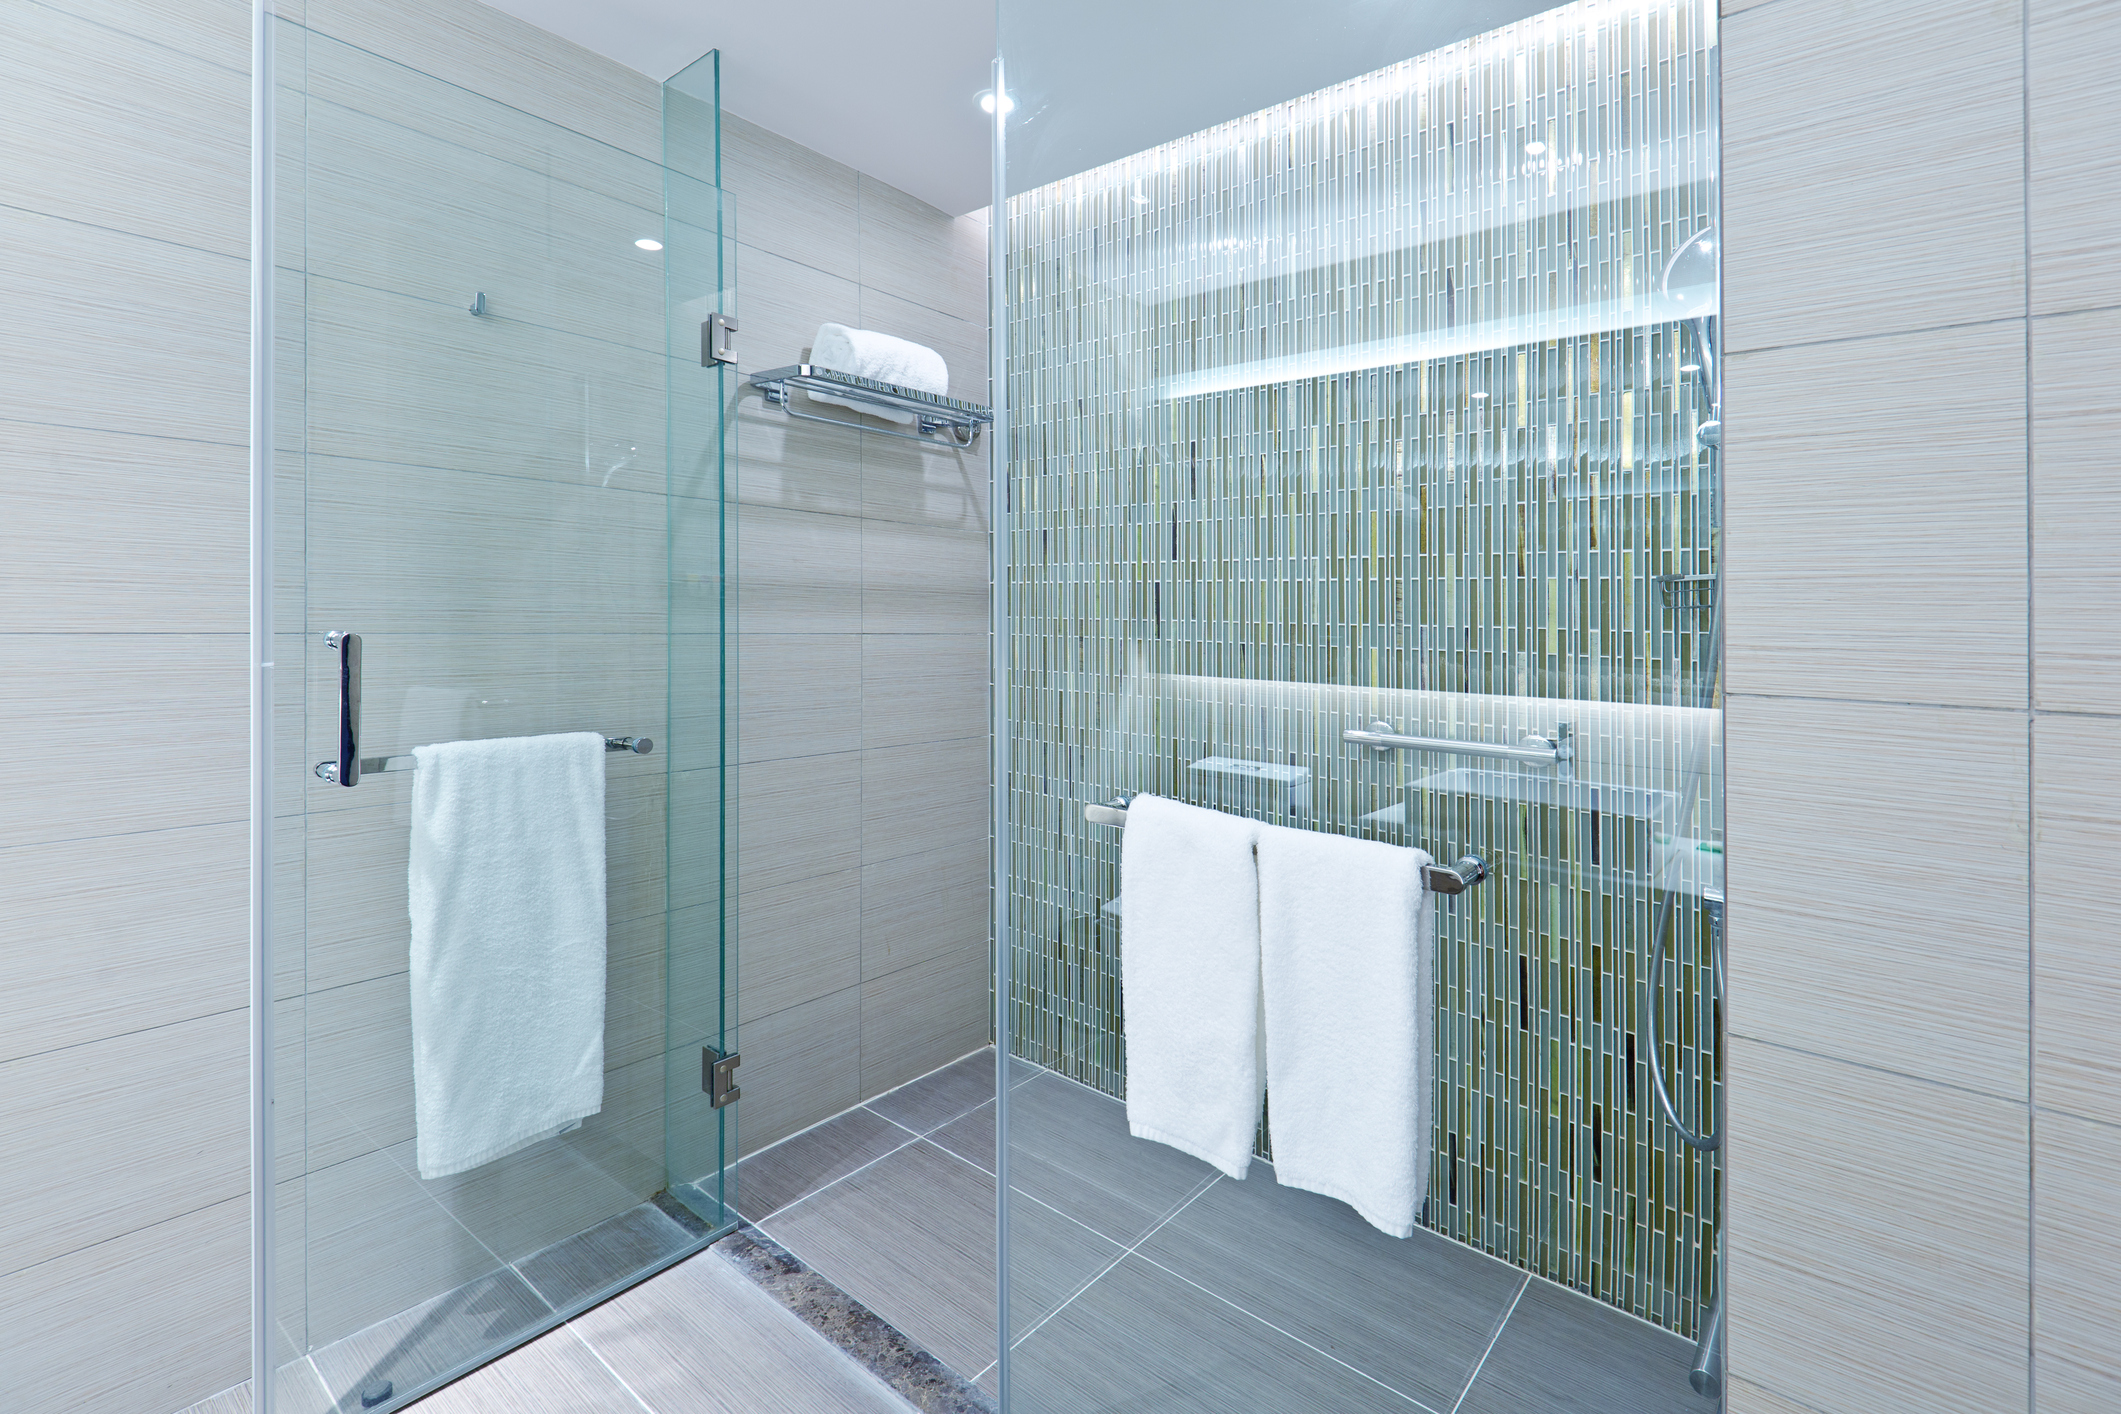 A contemporary modern bathroom design. Glass enclosed shower stall with porcelain tiles. A newly remodeled bathroom.